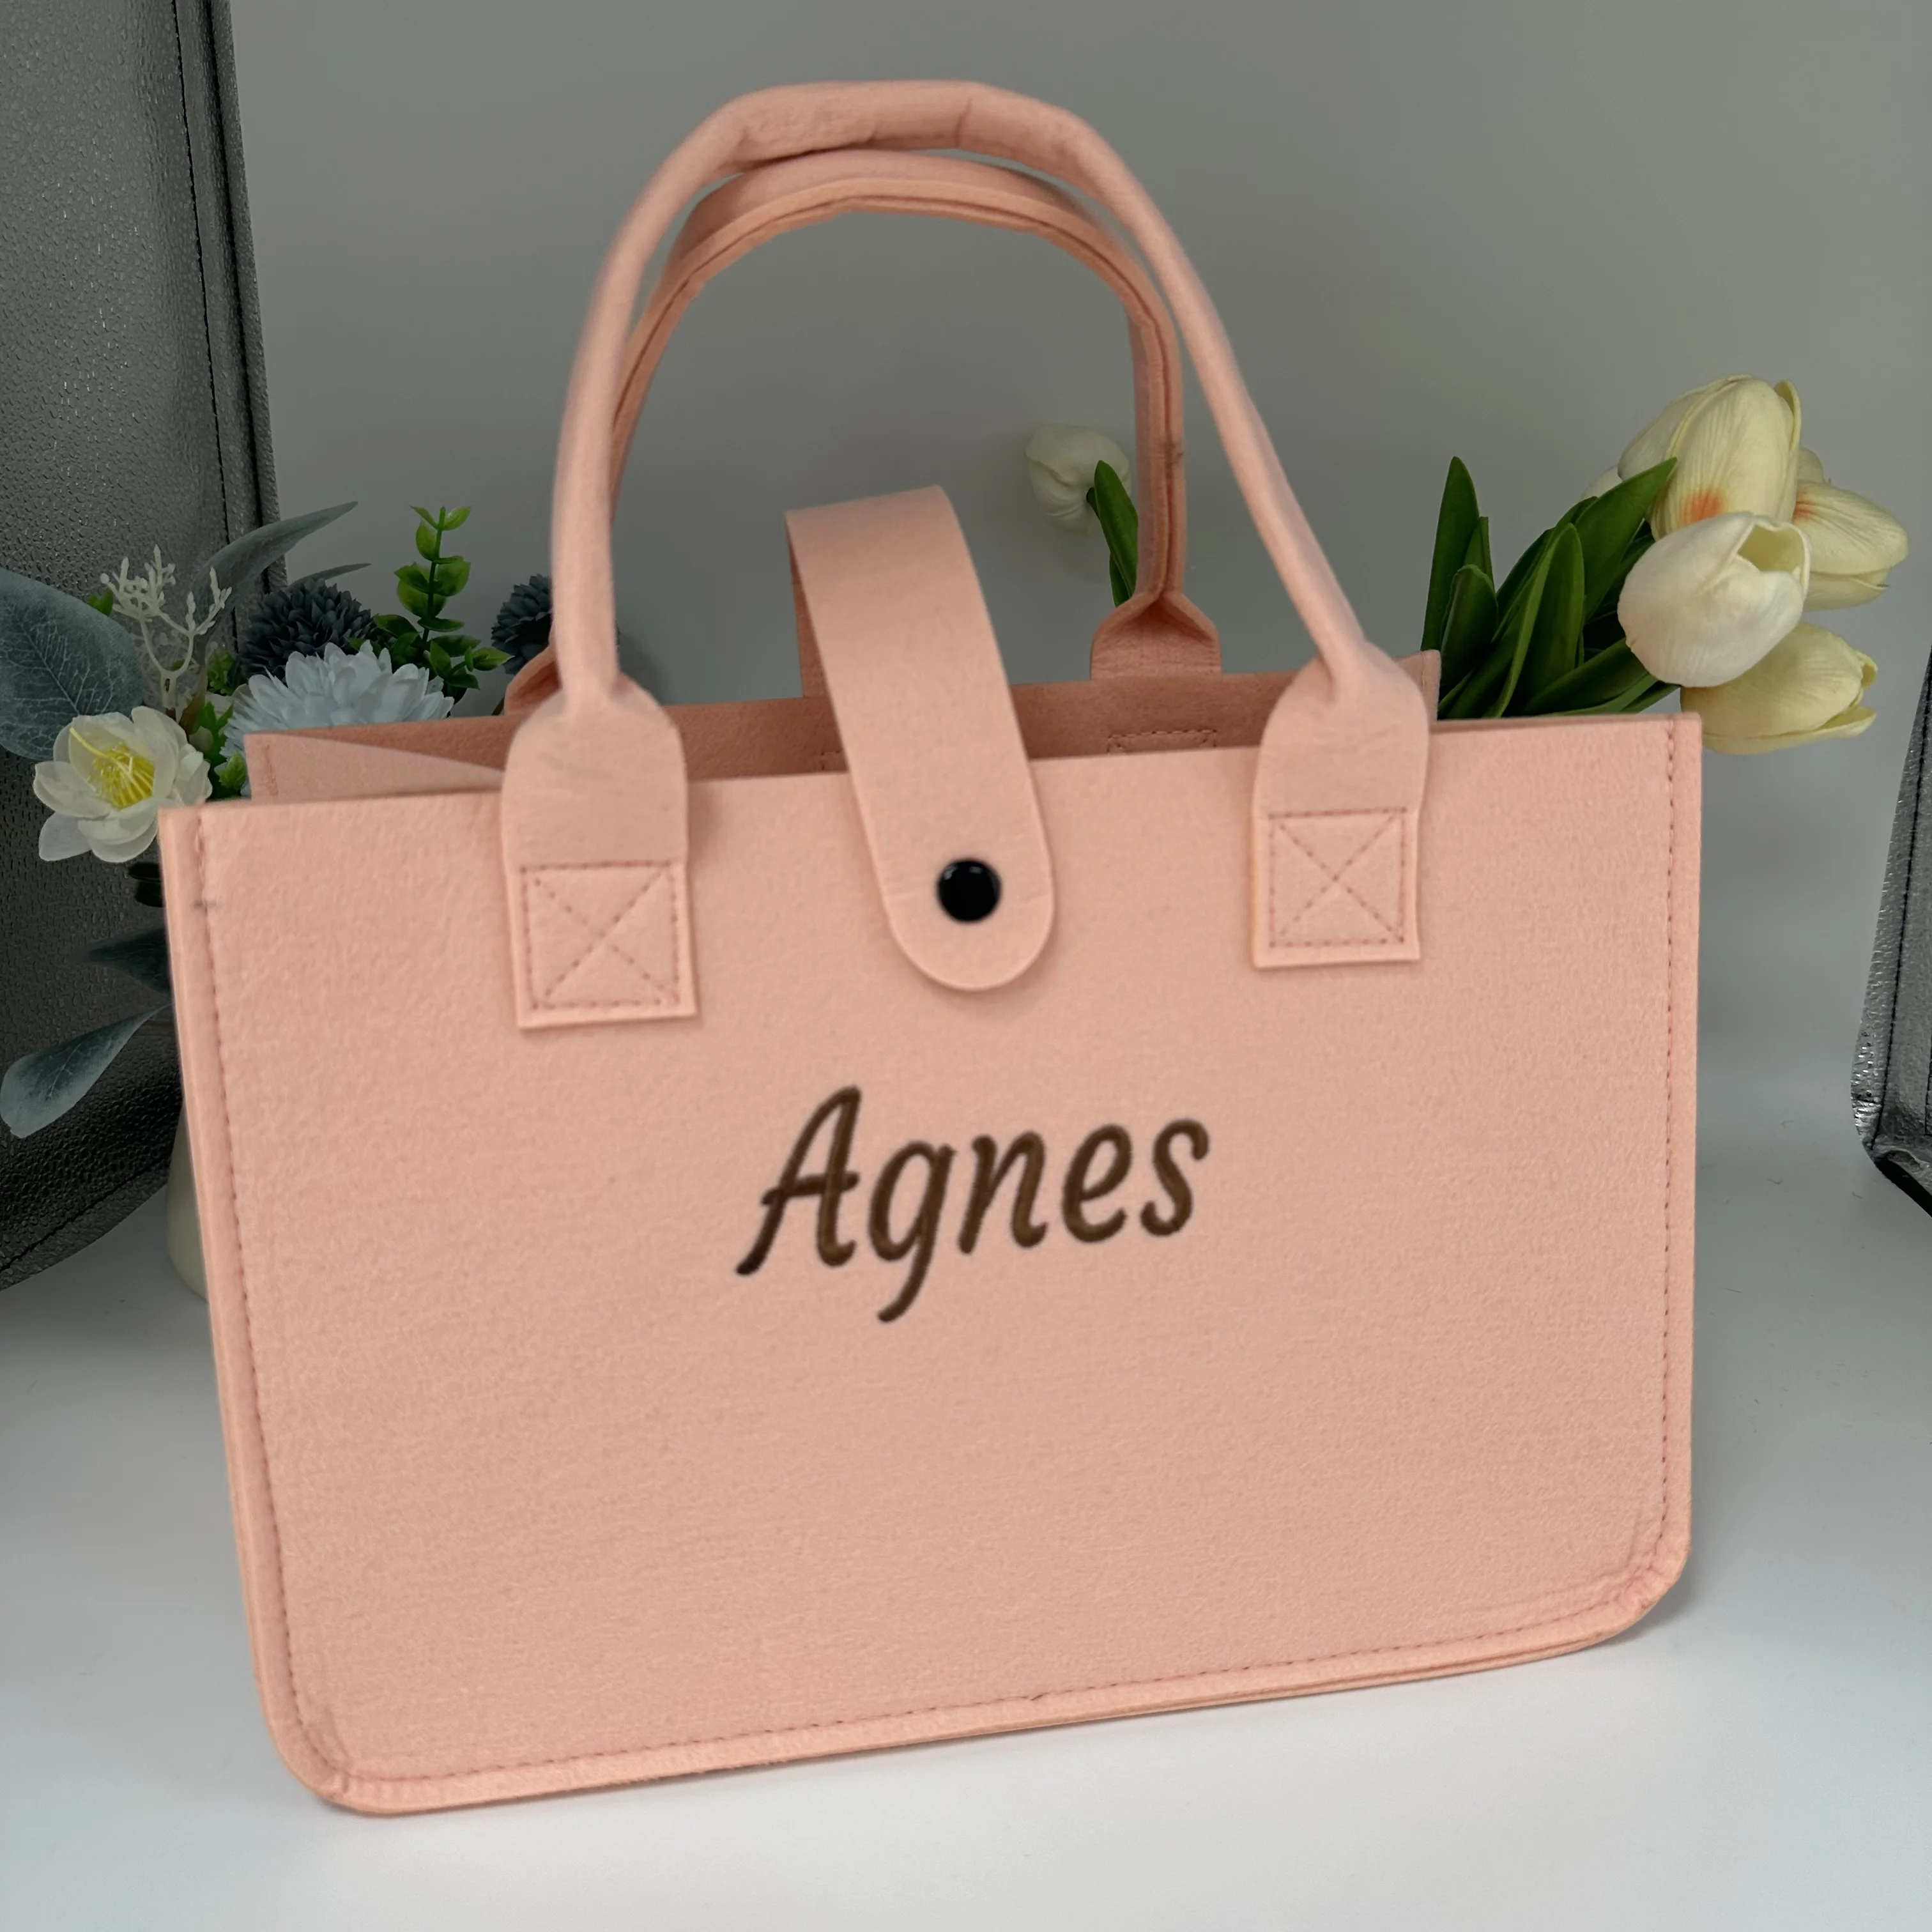 

Embroidered Felt Tote Bag Personalized Name Women's Colored Handbag Solid Color Ladies Tote Travel Bags Shopping Bag with Name